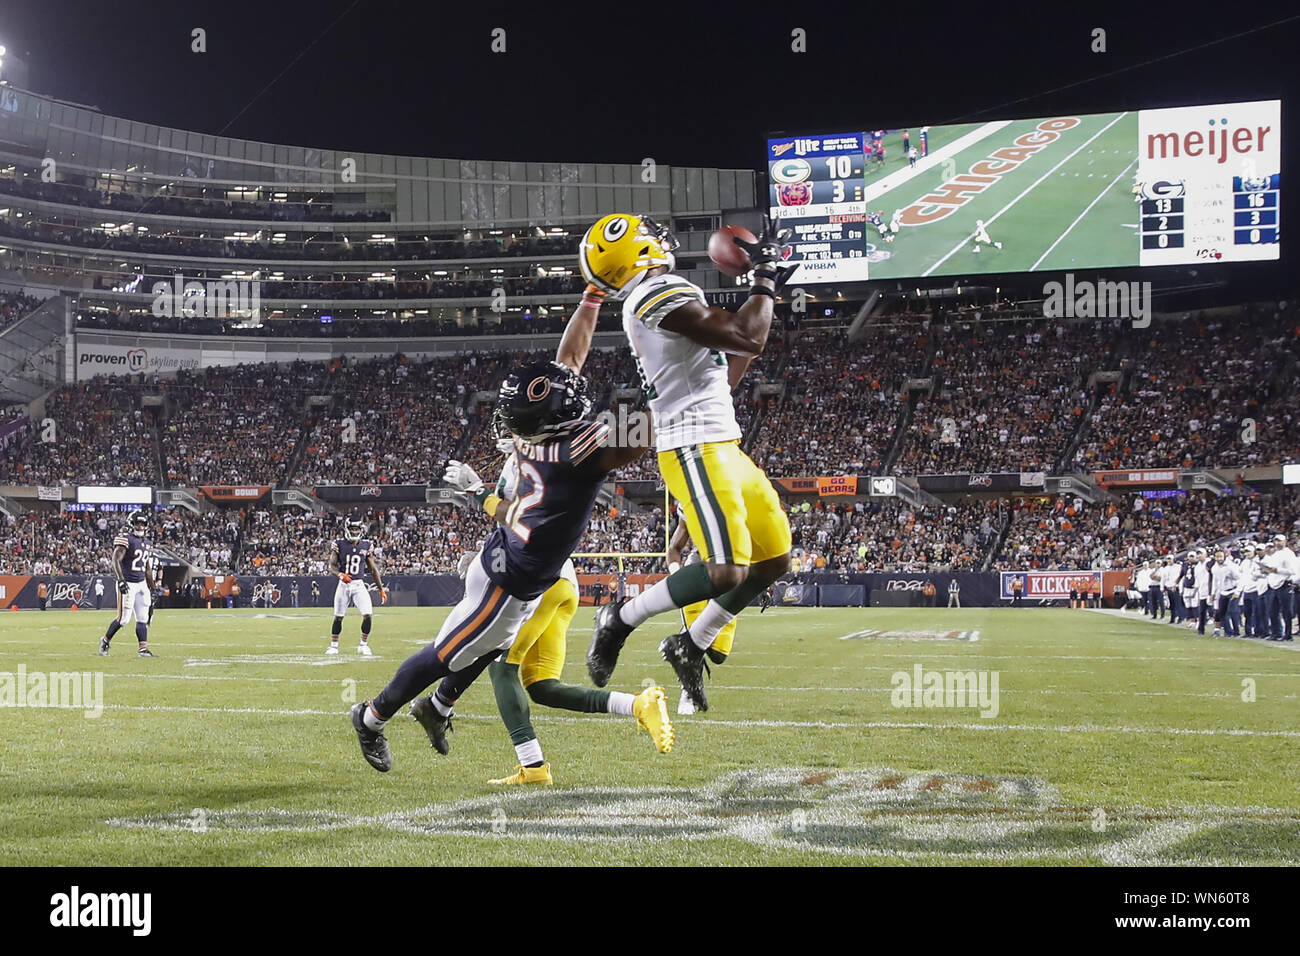 Chicago, United States. 05th Sep, 2019. Green Bay Packers strong safety Adrian Amos (R) intercepts a pass intended for Chicago Bears wide receiver Allen Robinson (L) during the second half of an NFL game at Soldier Field in Chicago on Thursday, September 5, 2019. Photo by Kamil Krzaczynski/UPI Credit: UPI/Alamy Live News Stock Photo